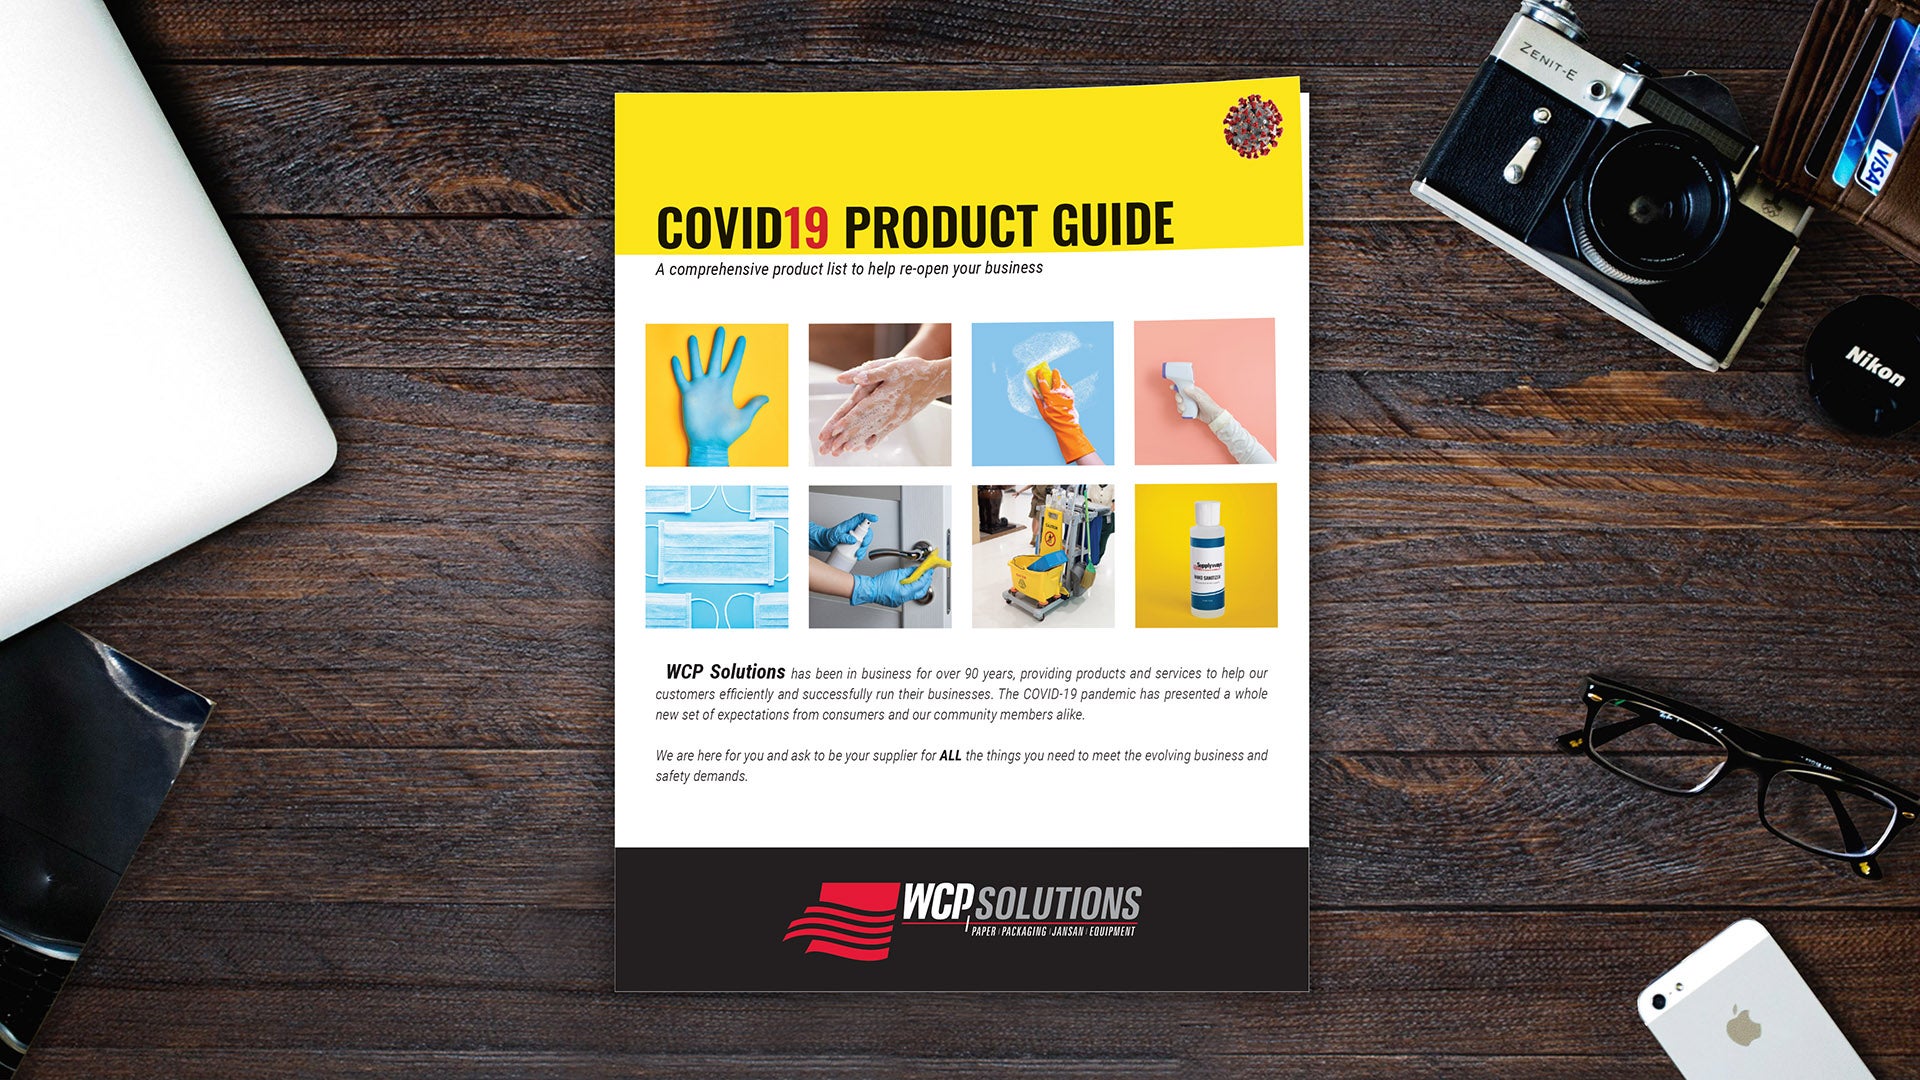 COVID-19 PRODUCT GUIDE - FROM WCP SOLUTIONS